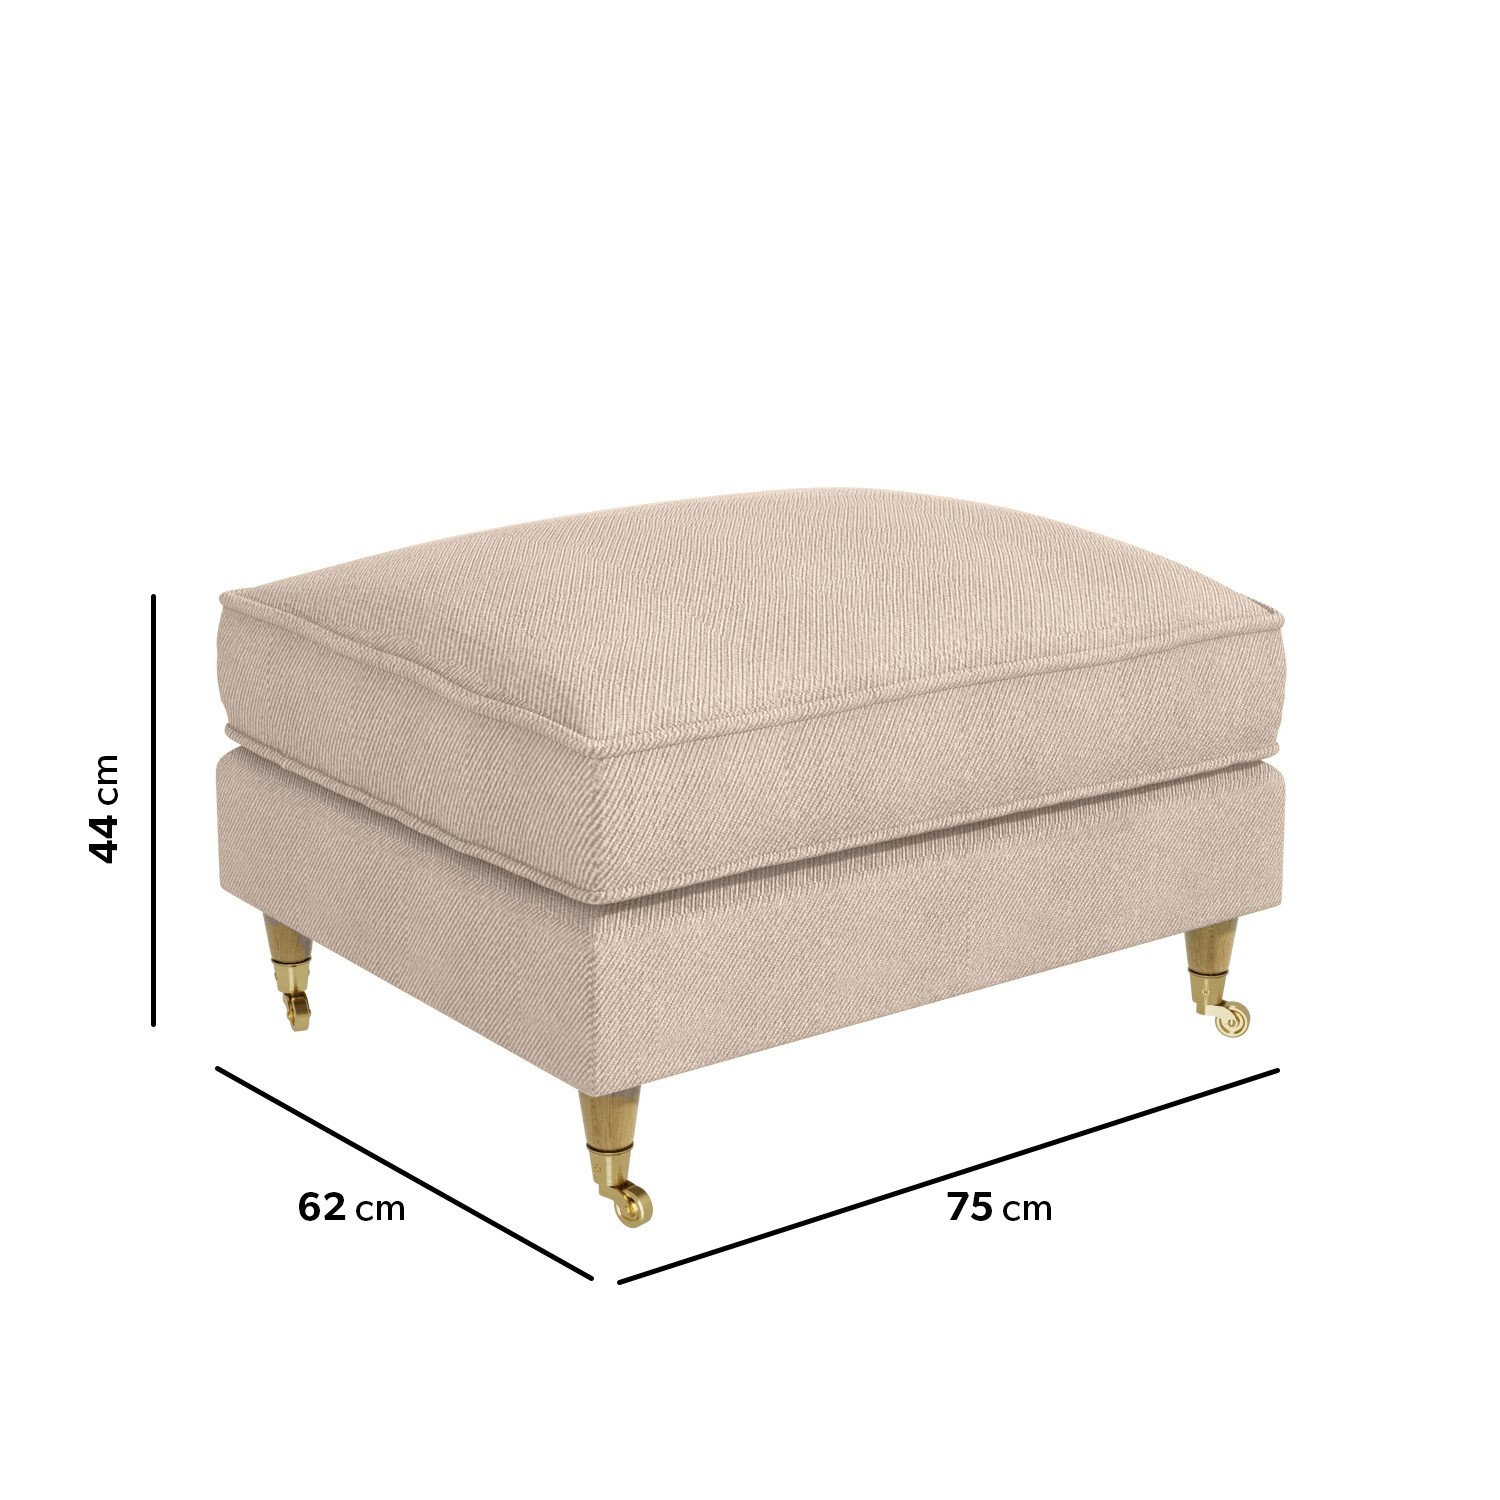 Read more about Beige woven footstool payton